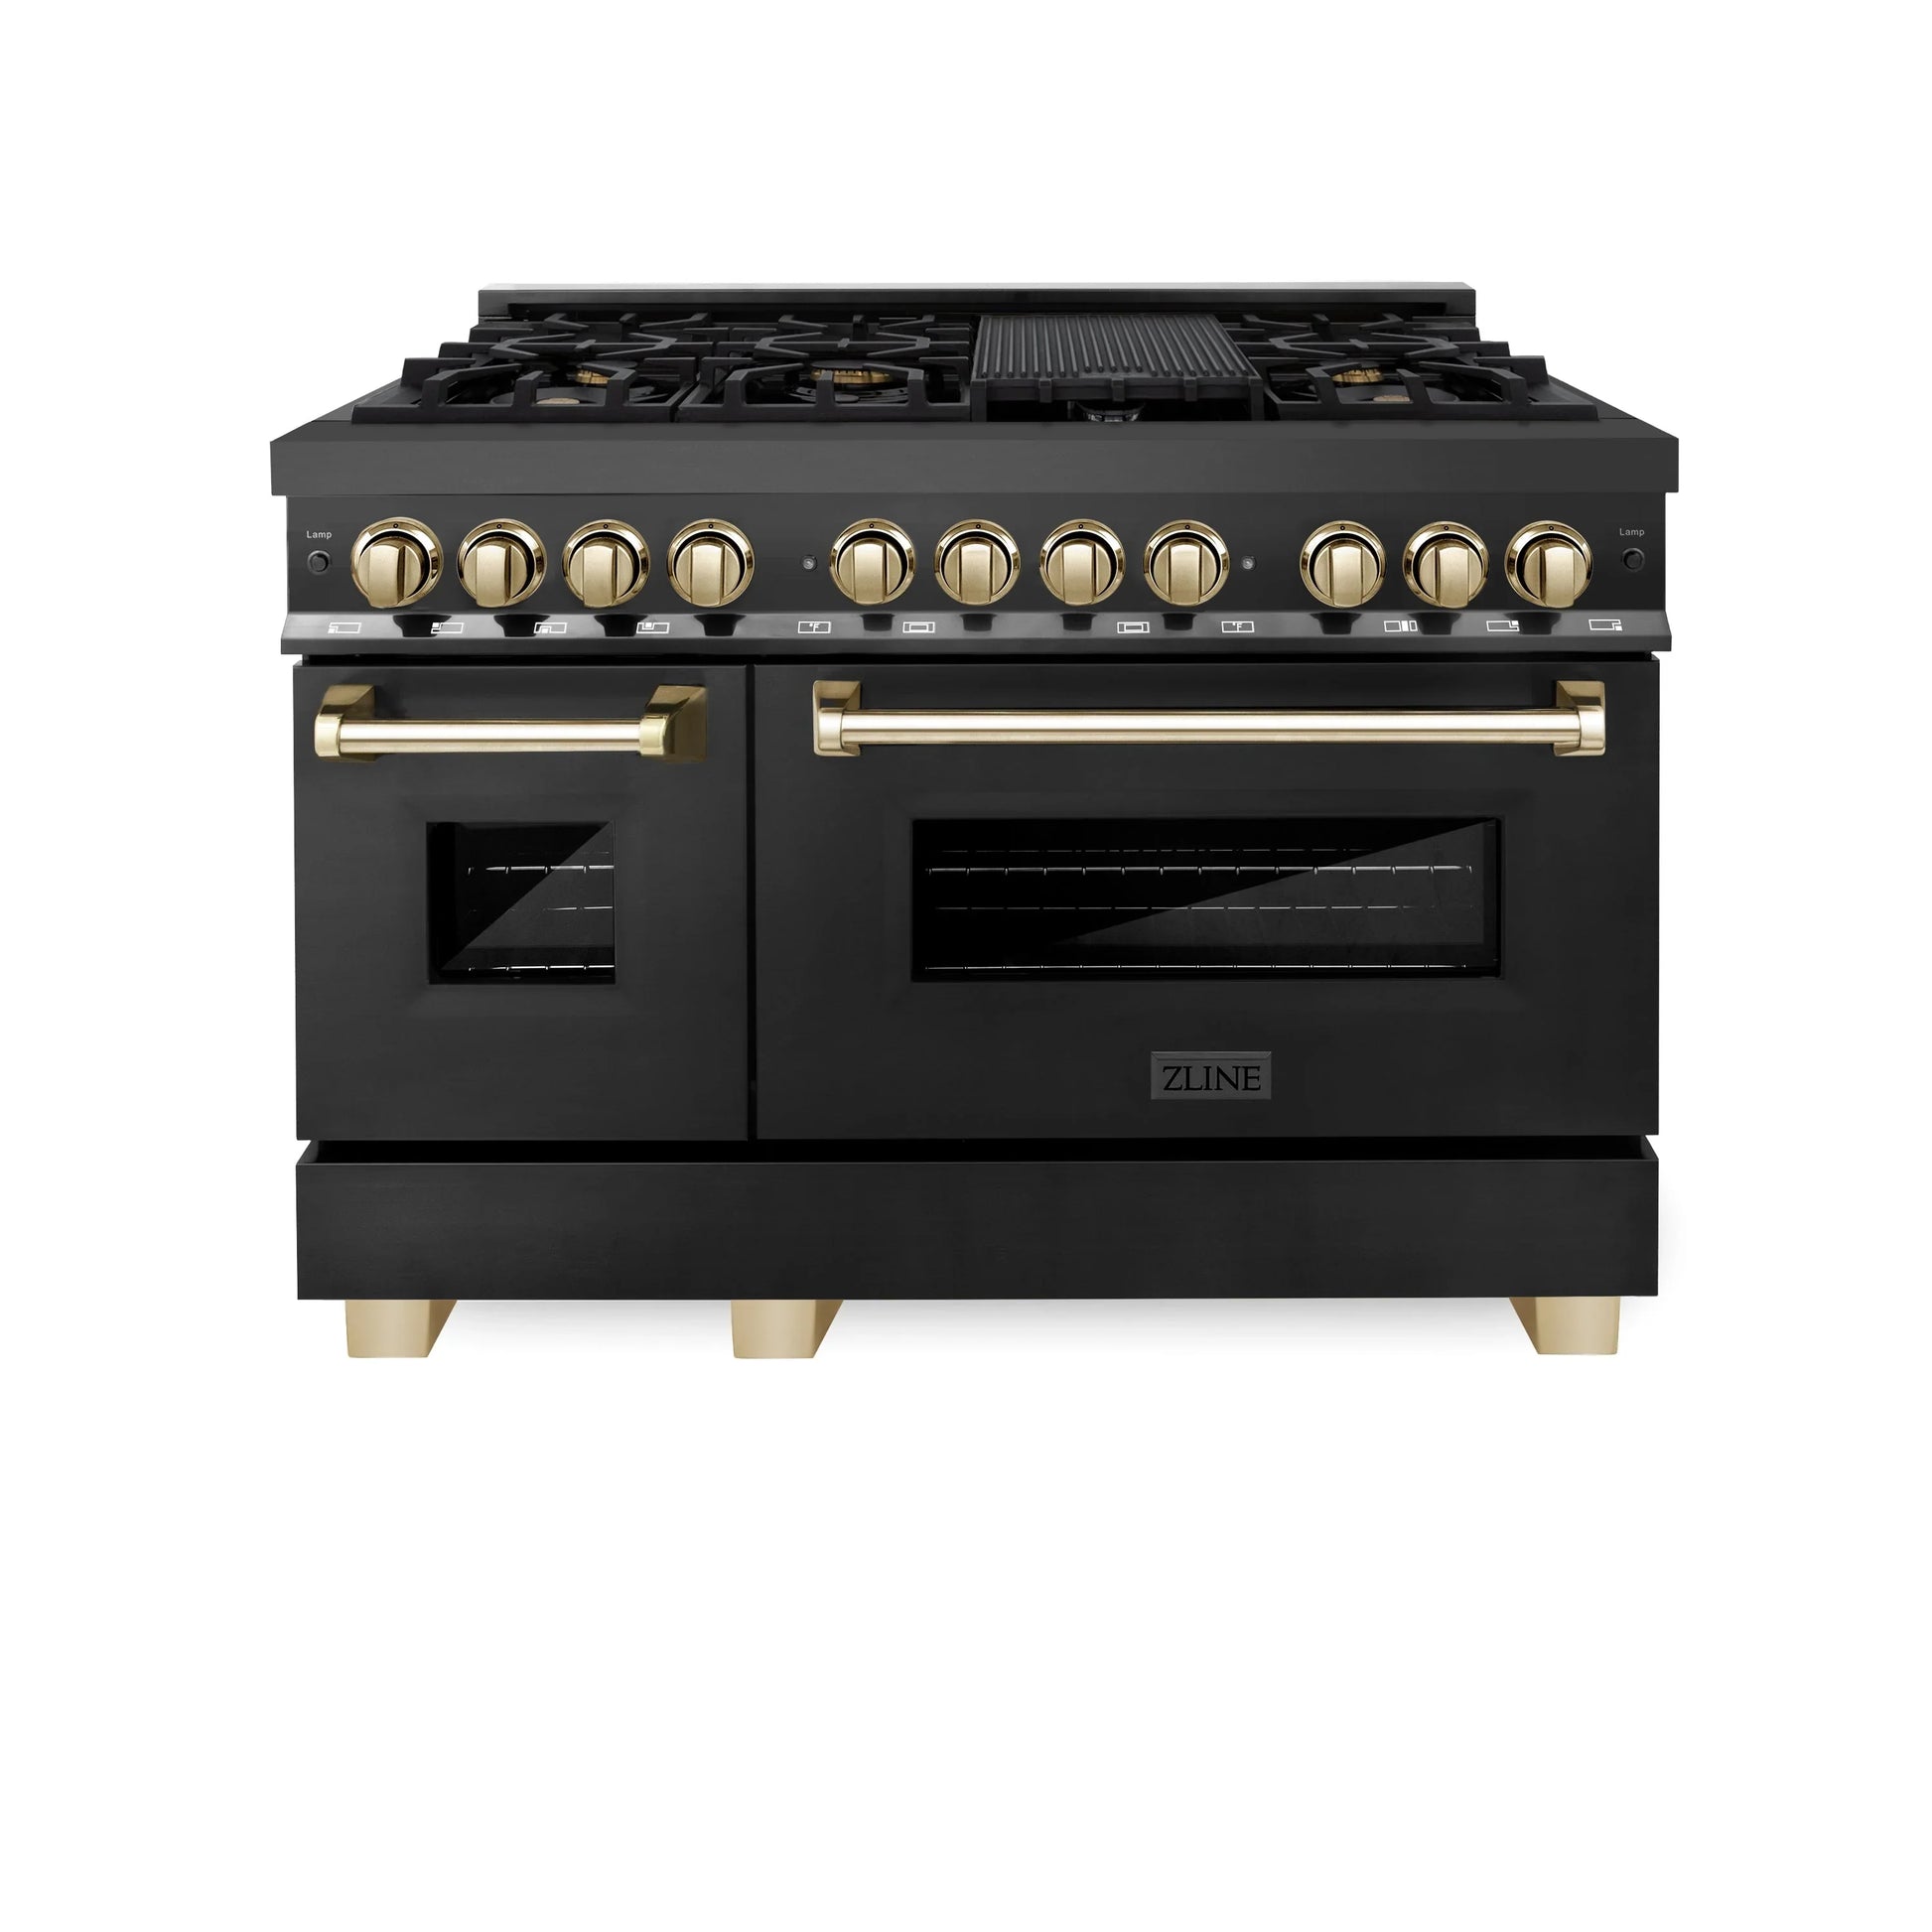 ZLINE Autograph Edition 48" Dual Fuel Range with Gas Stove and Electric Oven - Black Stainless Steel with Gold Accents